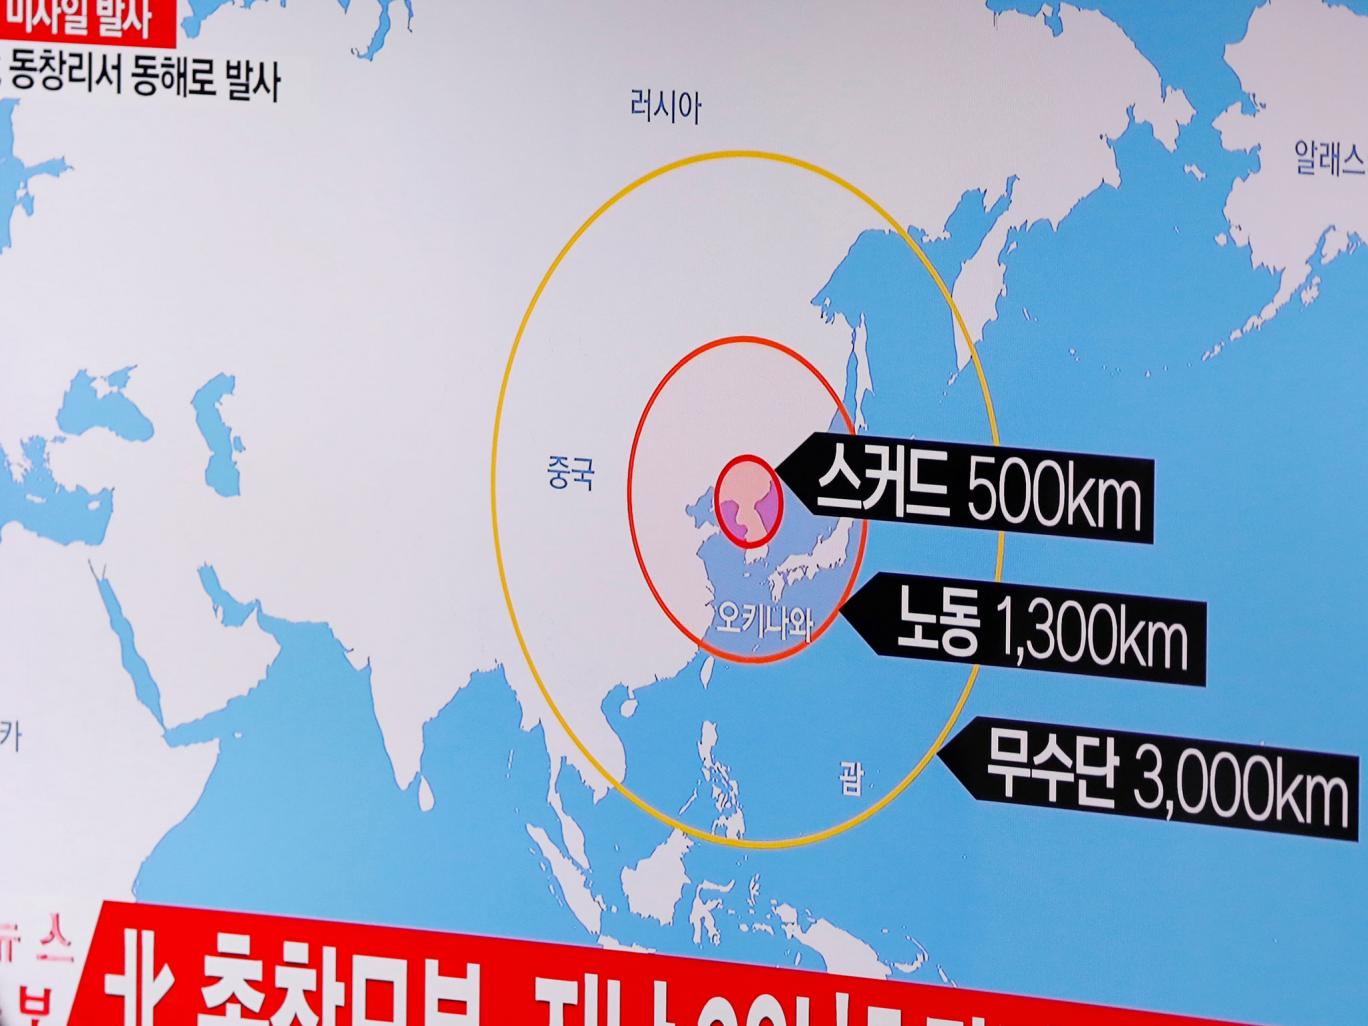 N Korea Fires Four Ballistic Missiles in Direction of Japan